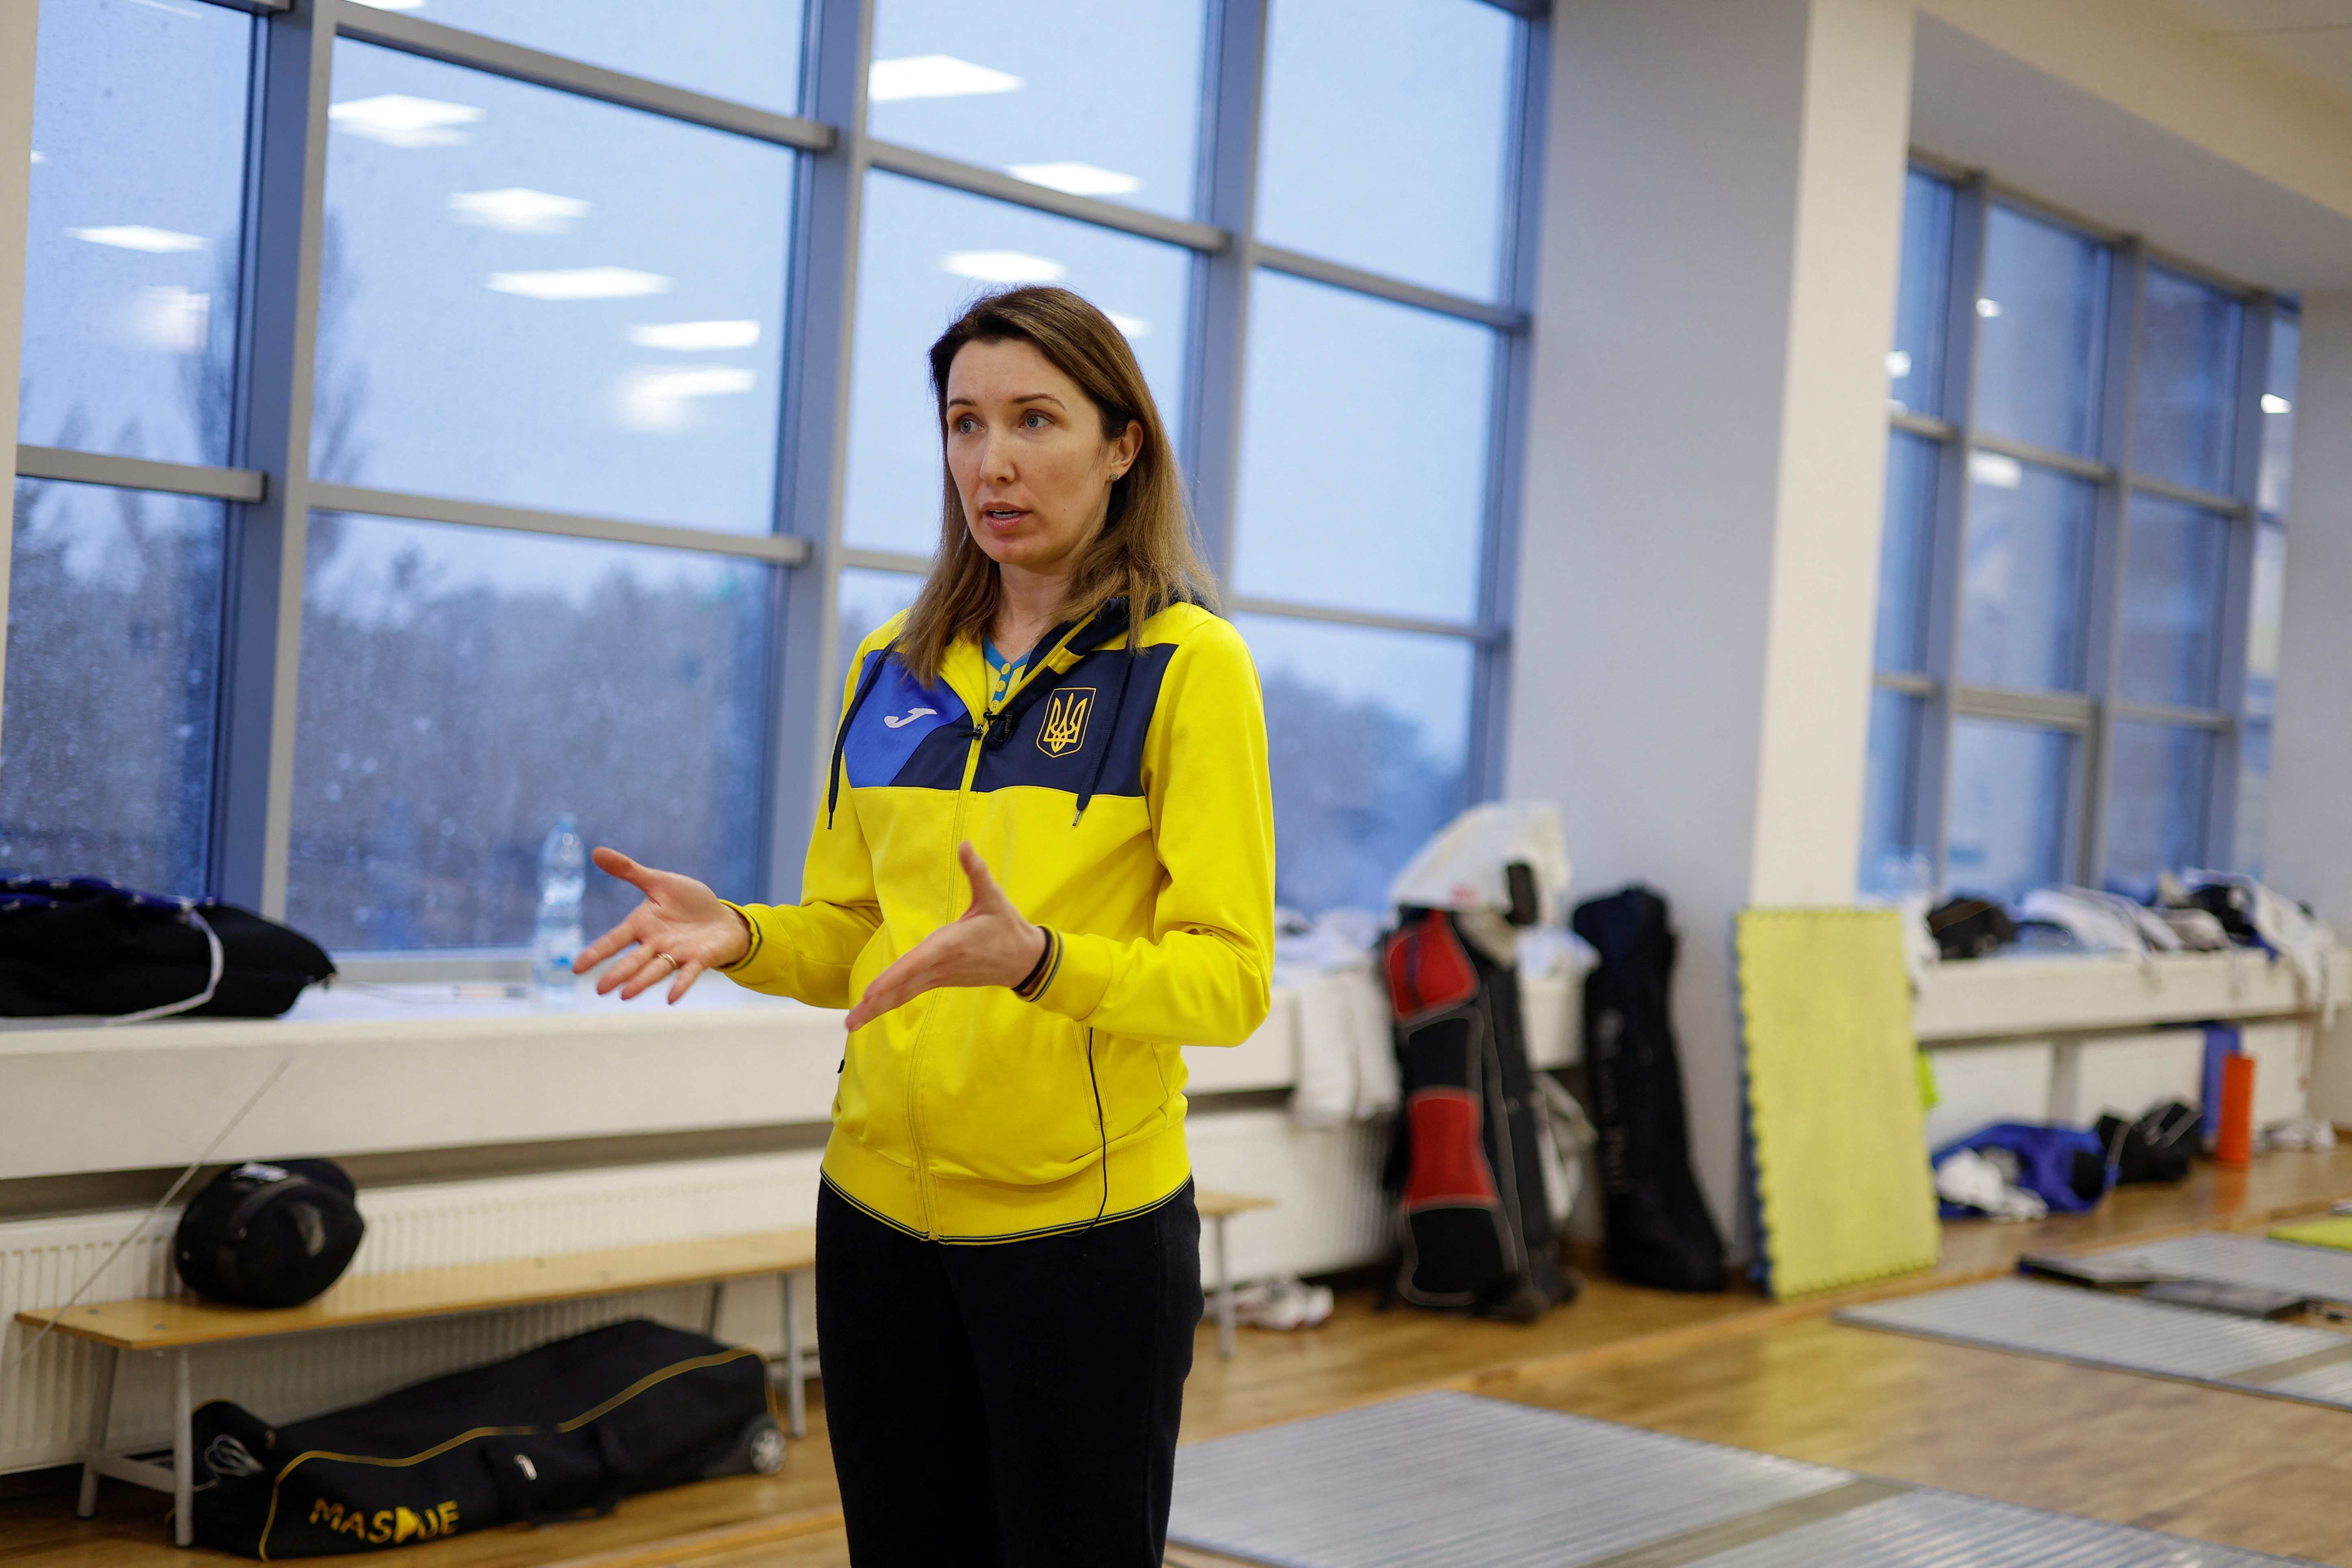 Senior coach of Ukraine's fencing team Olha Leleiko speaks to Reuters journalist after a training session at the Olympic training base in Kyiv